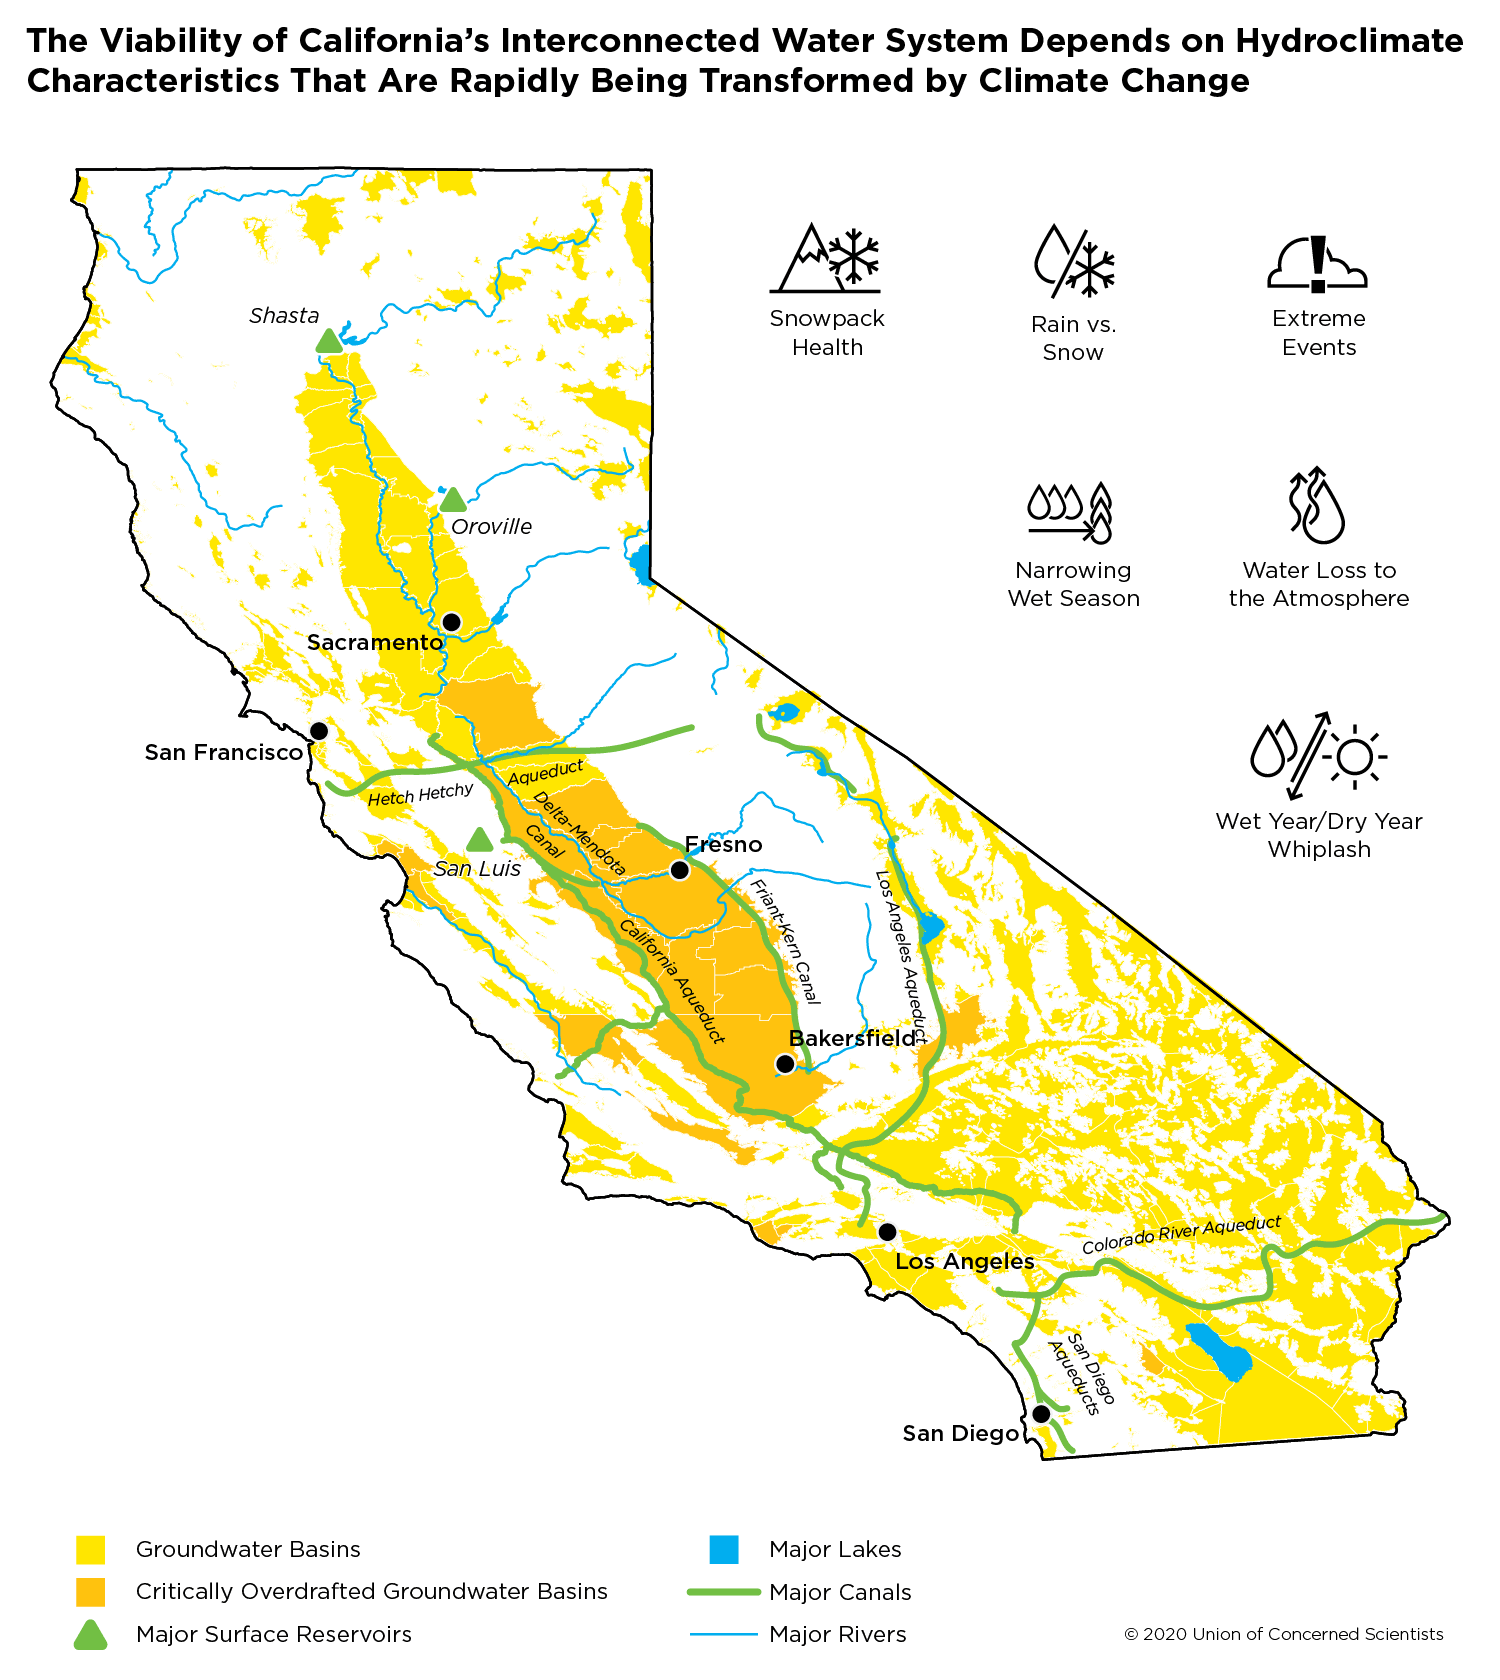 Map of California’s interconnected water system and hydroclimate characteristics